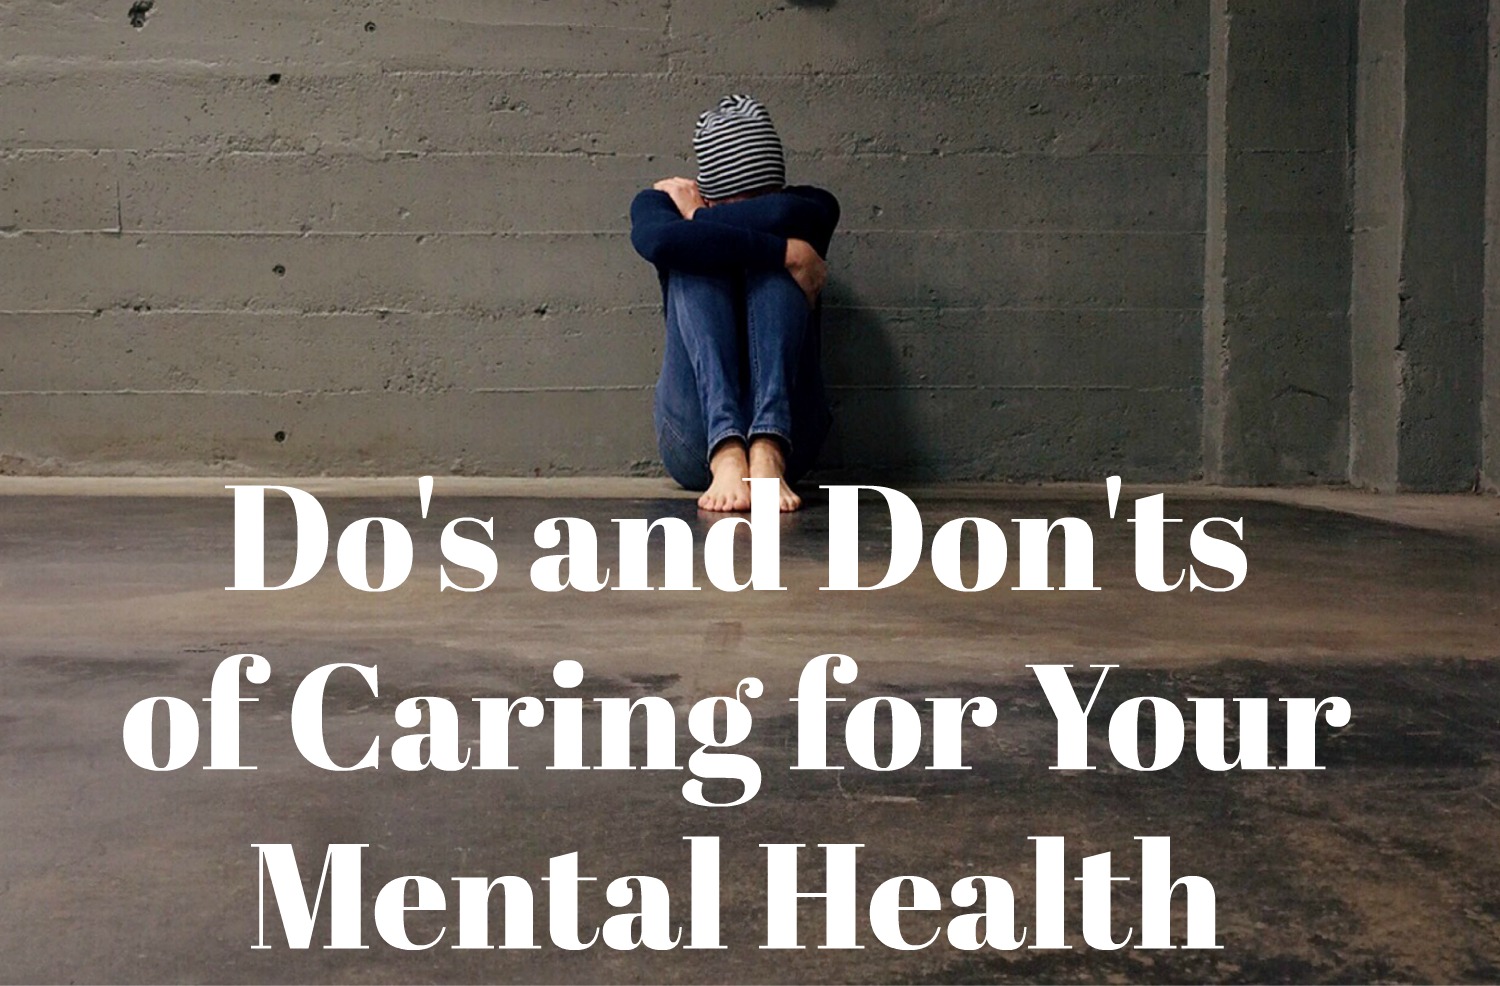 Do's and Don'ts of caring for your mental health